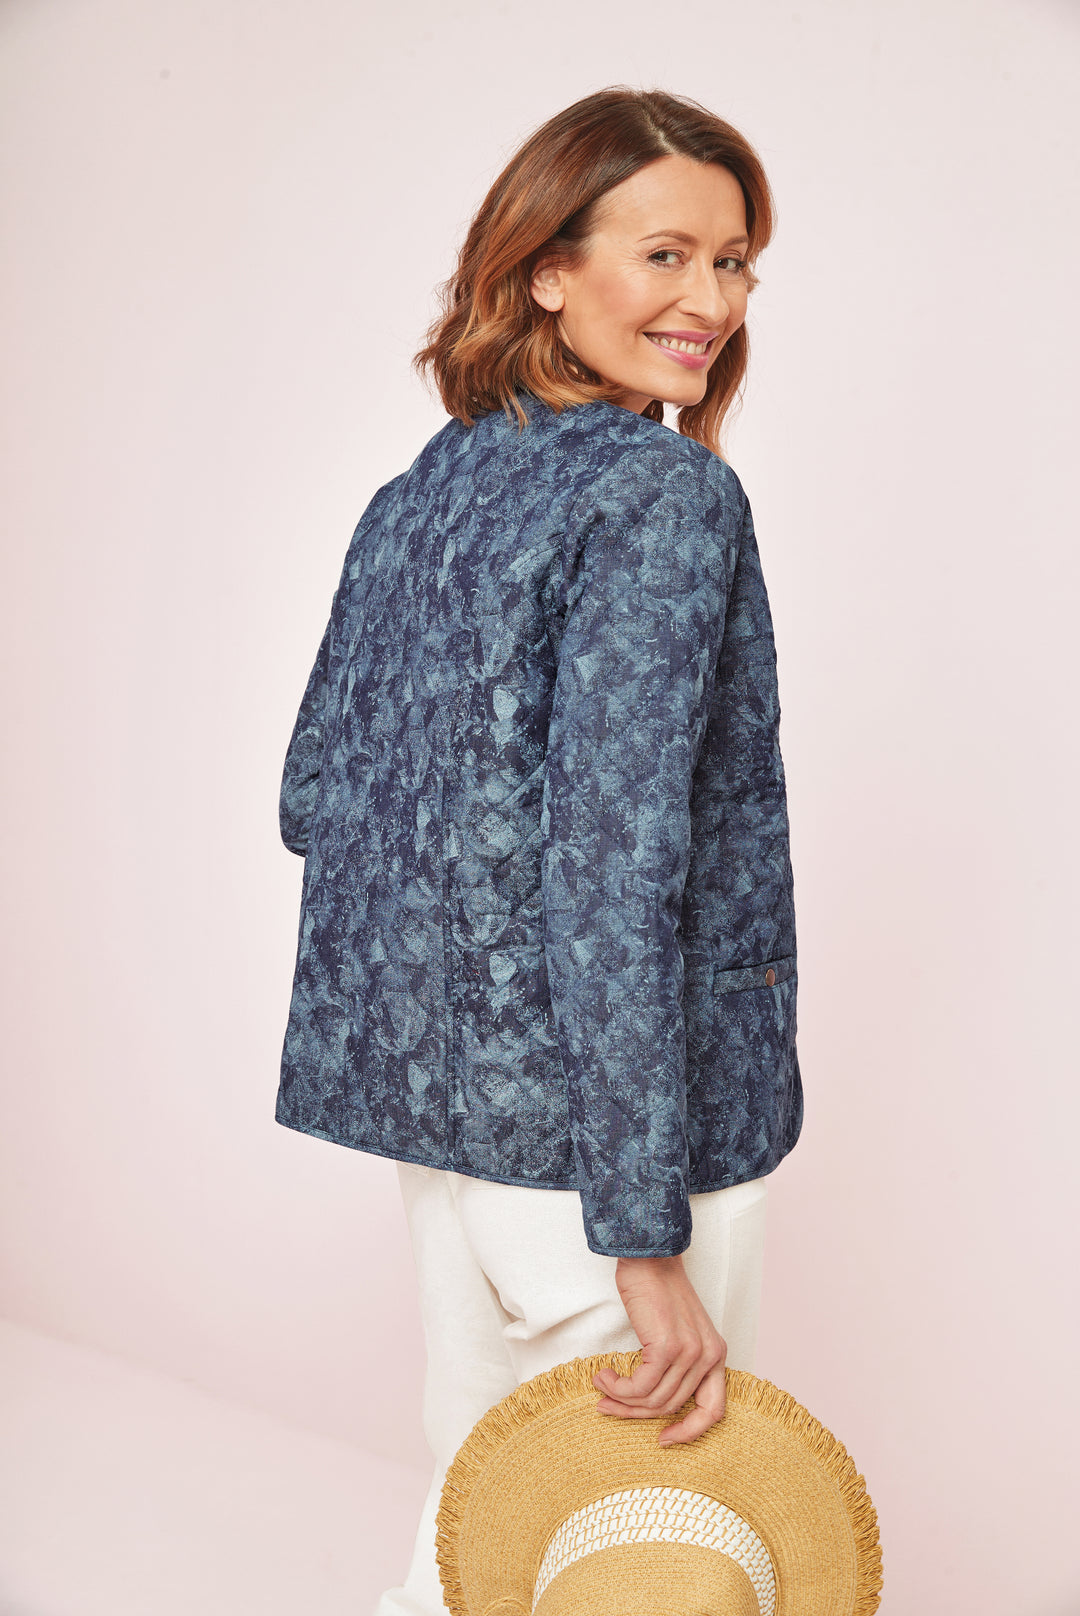 Lily Ella Collection stylish blue patterned jacket for women, rear view of elegant chic outerwear, paired with white trousers and holding straw hat.